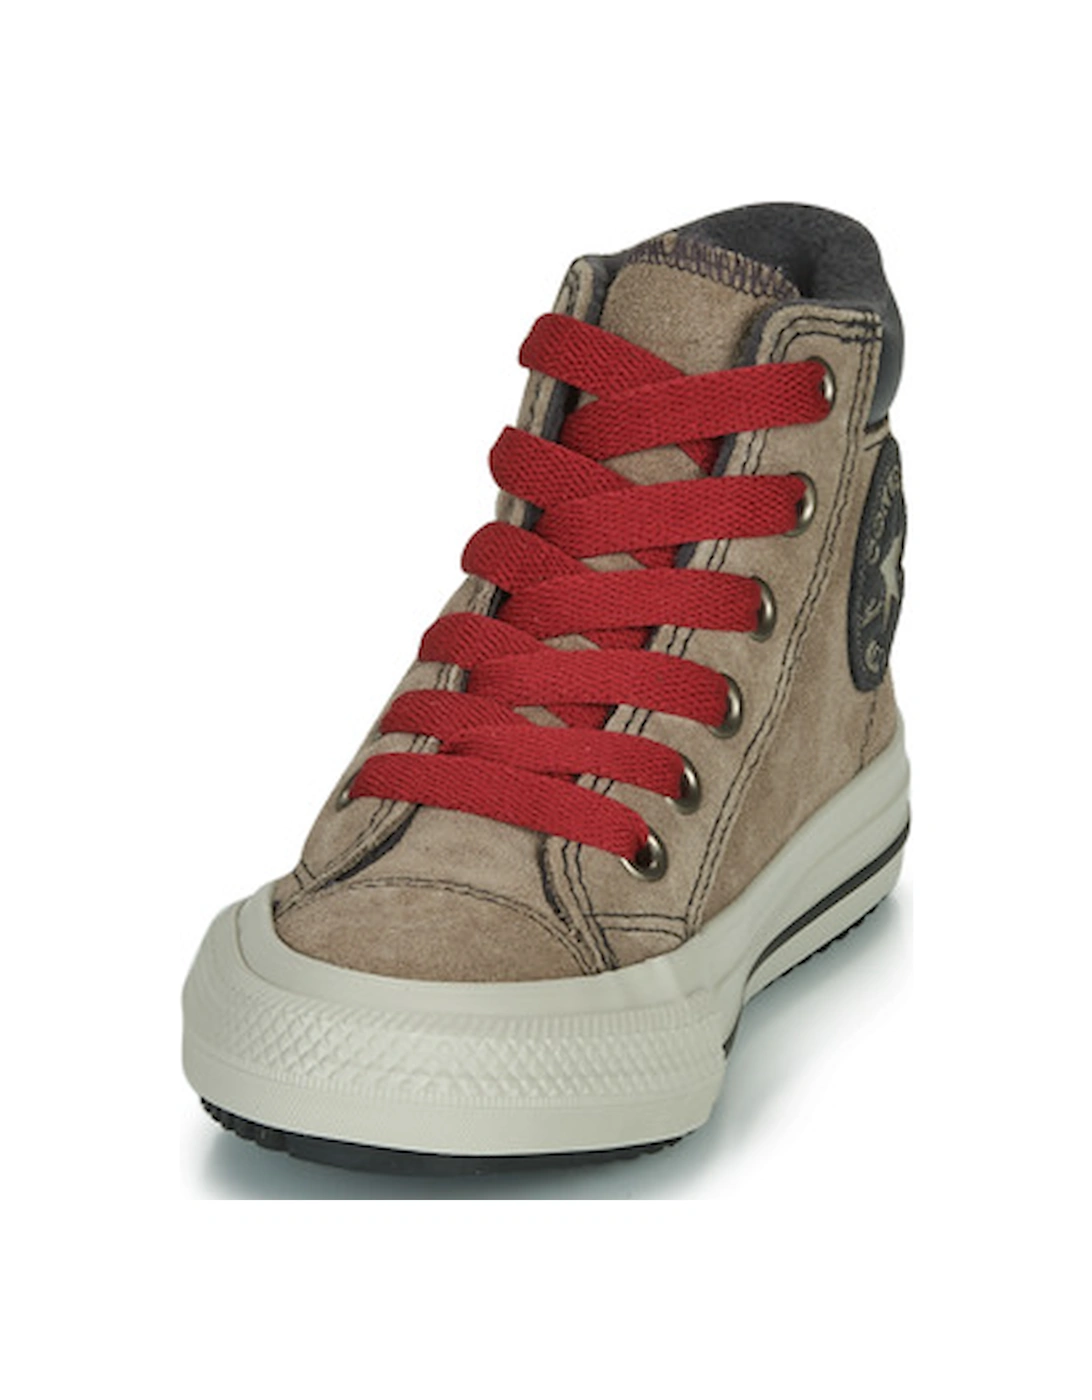 CHUCK TAYLOR ALL STAR PC BOOT BOOTS ON MARS - HI